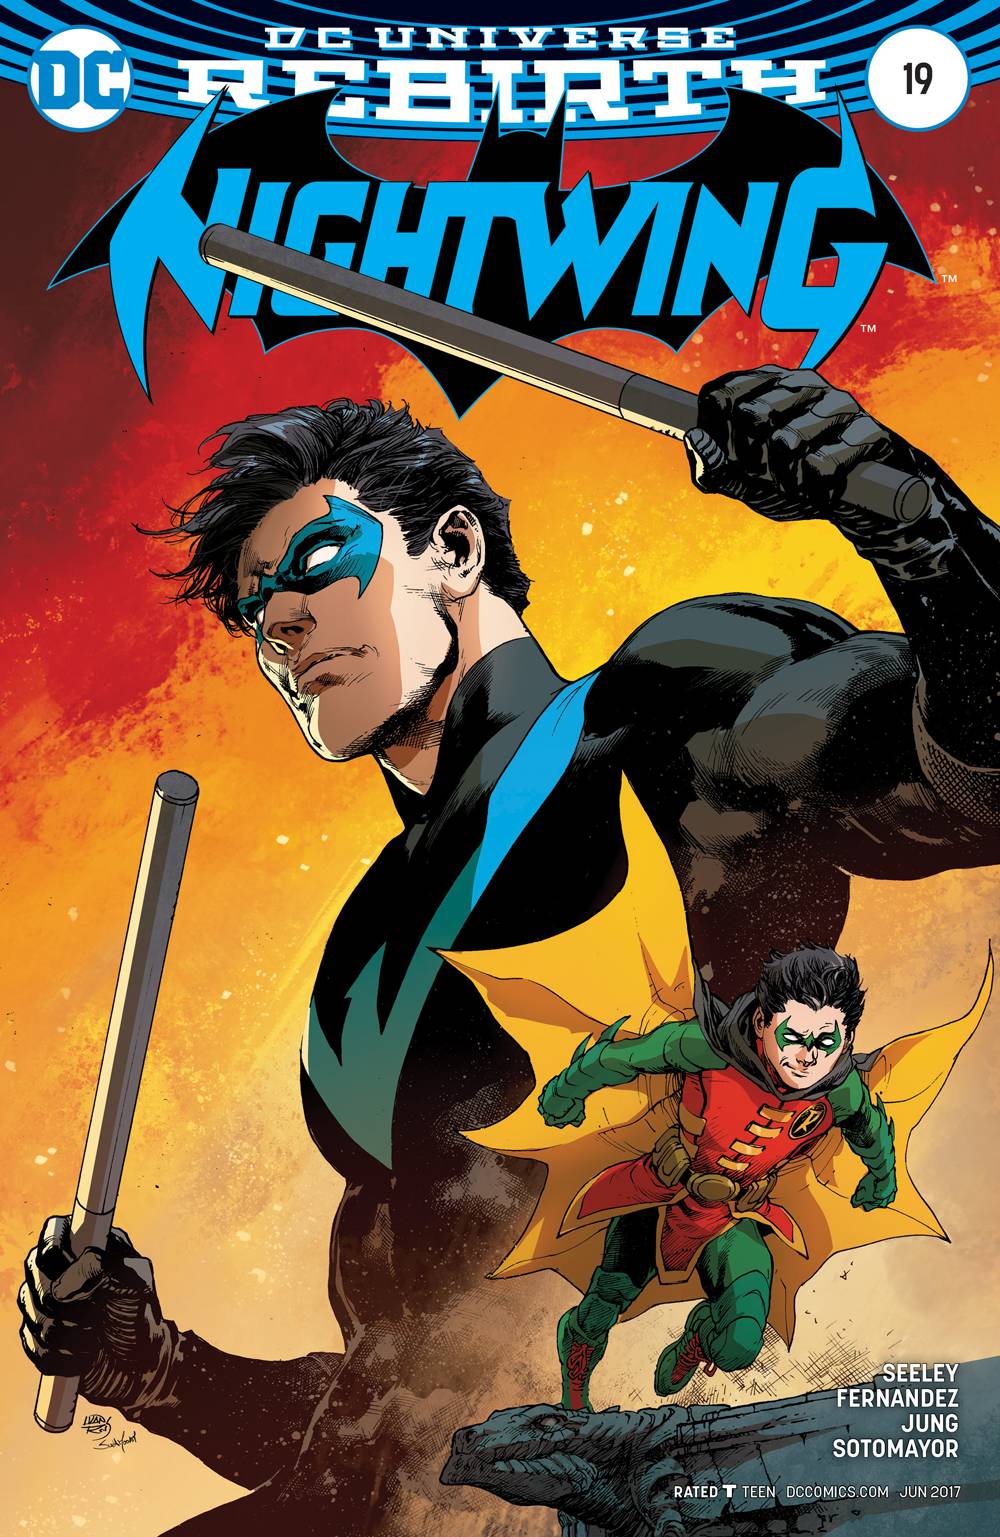 Nightwing #19 Variant Edition (2016)